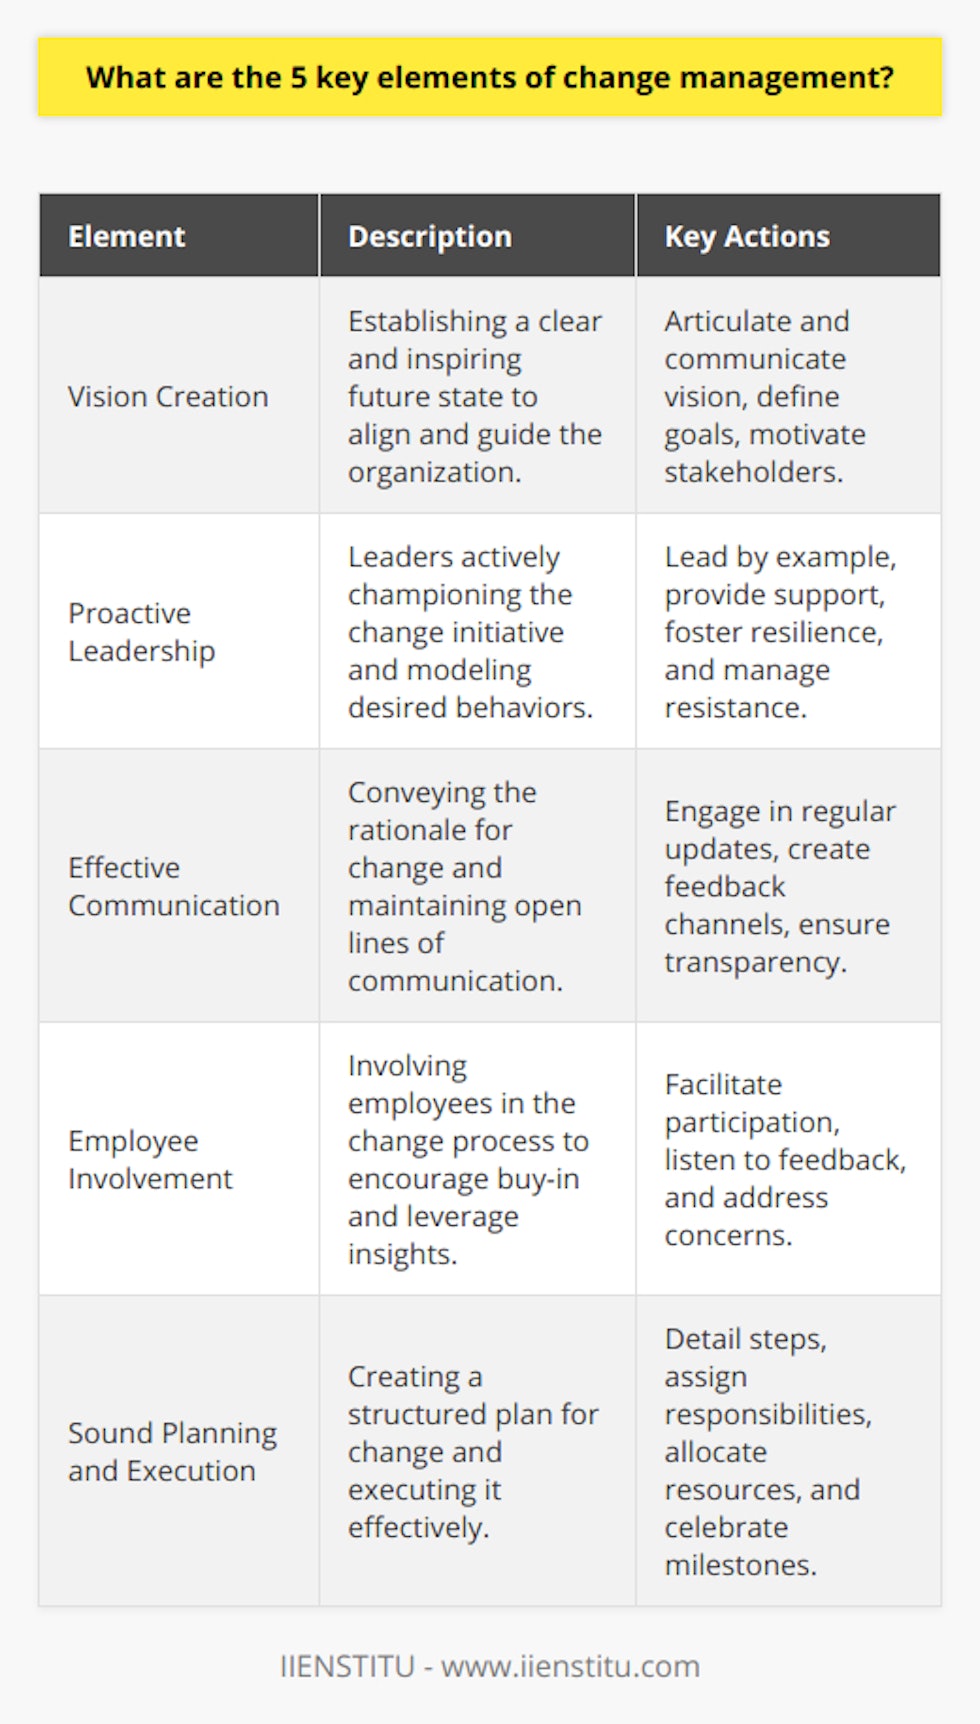 Change management is a systematic approach aimed at transitioning individuals, teams, and organizations from a current state to a desired future state. It is a critical process for ensuring that changes are implemented smoothly and sustainably. In order to achieve this, there are five key elements that must be carefully considered and orchestrated:1. Vision Creation:Creating a clear, actionable, and inspiring vision is the first step in the change management process. A well-articulated vision sets the direction and purpose of the change, providing a shared goal that the organization aims to achieve. Not only does the vision serve as a guidepost for what the change should accomplish, but it also motivates and aligns stakeholders. The vision must be communicated effectively to everyone involved so that they understand their role in realizing it.2. Proactive Leadership:Effective change management relies heavily on leadership that is both visible and proactive. Leaders must champion the change and model the behaviors that the change seeks to promote. They should be the driving force behind the change, demonstrating commitment and providing the necessary support to move the process forward. Leaders also play a crucial role in building a culture of resilience, encouraging innovation, and managing any resistance to change.3. Effective Communication:Communication is pivotal throughout the change management process. It involves clearly conveying the reasons for the change, the benefits it will bring, and the impact it may have on individuals and teams. Effective communication strategies can include regular updates, open forums for questions and feedback, and transparent reporting on change progress. Establishing two-way communication channels allows for valuable insights to be gathered from those affected by the change, and for concerns to be addressed in a timely manner.4. Employee Involvement:Successfully managing change requires active participation from those who will be affected by it. Involving employees early in the change process can help to foster ownership and buy-in. It's important to listen to their input, provide opportunities for them to influence the change, and acknowledge and address their concerns. This not only helps to mitigate resistance but also leverages the collective knowledge and experience within the organization to improve the change initiative.5. Sound Planning and Execution:Developing a structured and detailed change plan is essential for ensuring that change initiatives are actionable, measurable, and capable of achieving their objectives. The plan should outline concrete steps, designate roles and responsibilities, allocate resources, and establish timelines for implementation. Execution then involves tracking progress, adapting to any unforeseen challenges, and maintaining the momentum of change. It is critical to celebrate quick wins to reinforce the benefits of the change and to maintain engagement.In conclusion, the combination of a strong vision, proactive leadership, effective communication, employee involvement, and sound planning and execution constitutes the essence of change management success. By prioritizing these five elements, organizations can effectively navigate the complexities of change, minimize disruption, and achieve lasting improvements.As prominent education platforms like IIENSTITU can attest, providing training and resources to enhance the skills needed for effective change management is essential for organizations looking to stay competitive and adaptable in today's fast-changing business environment.